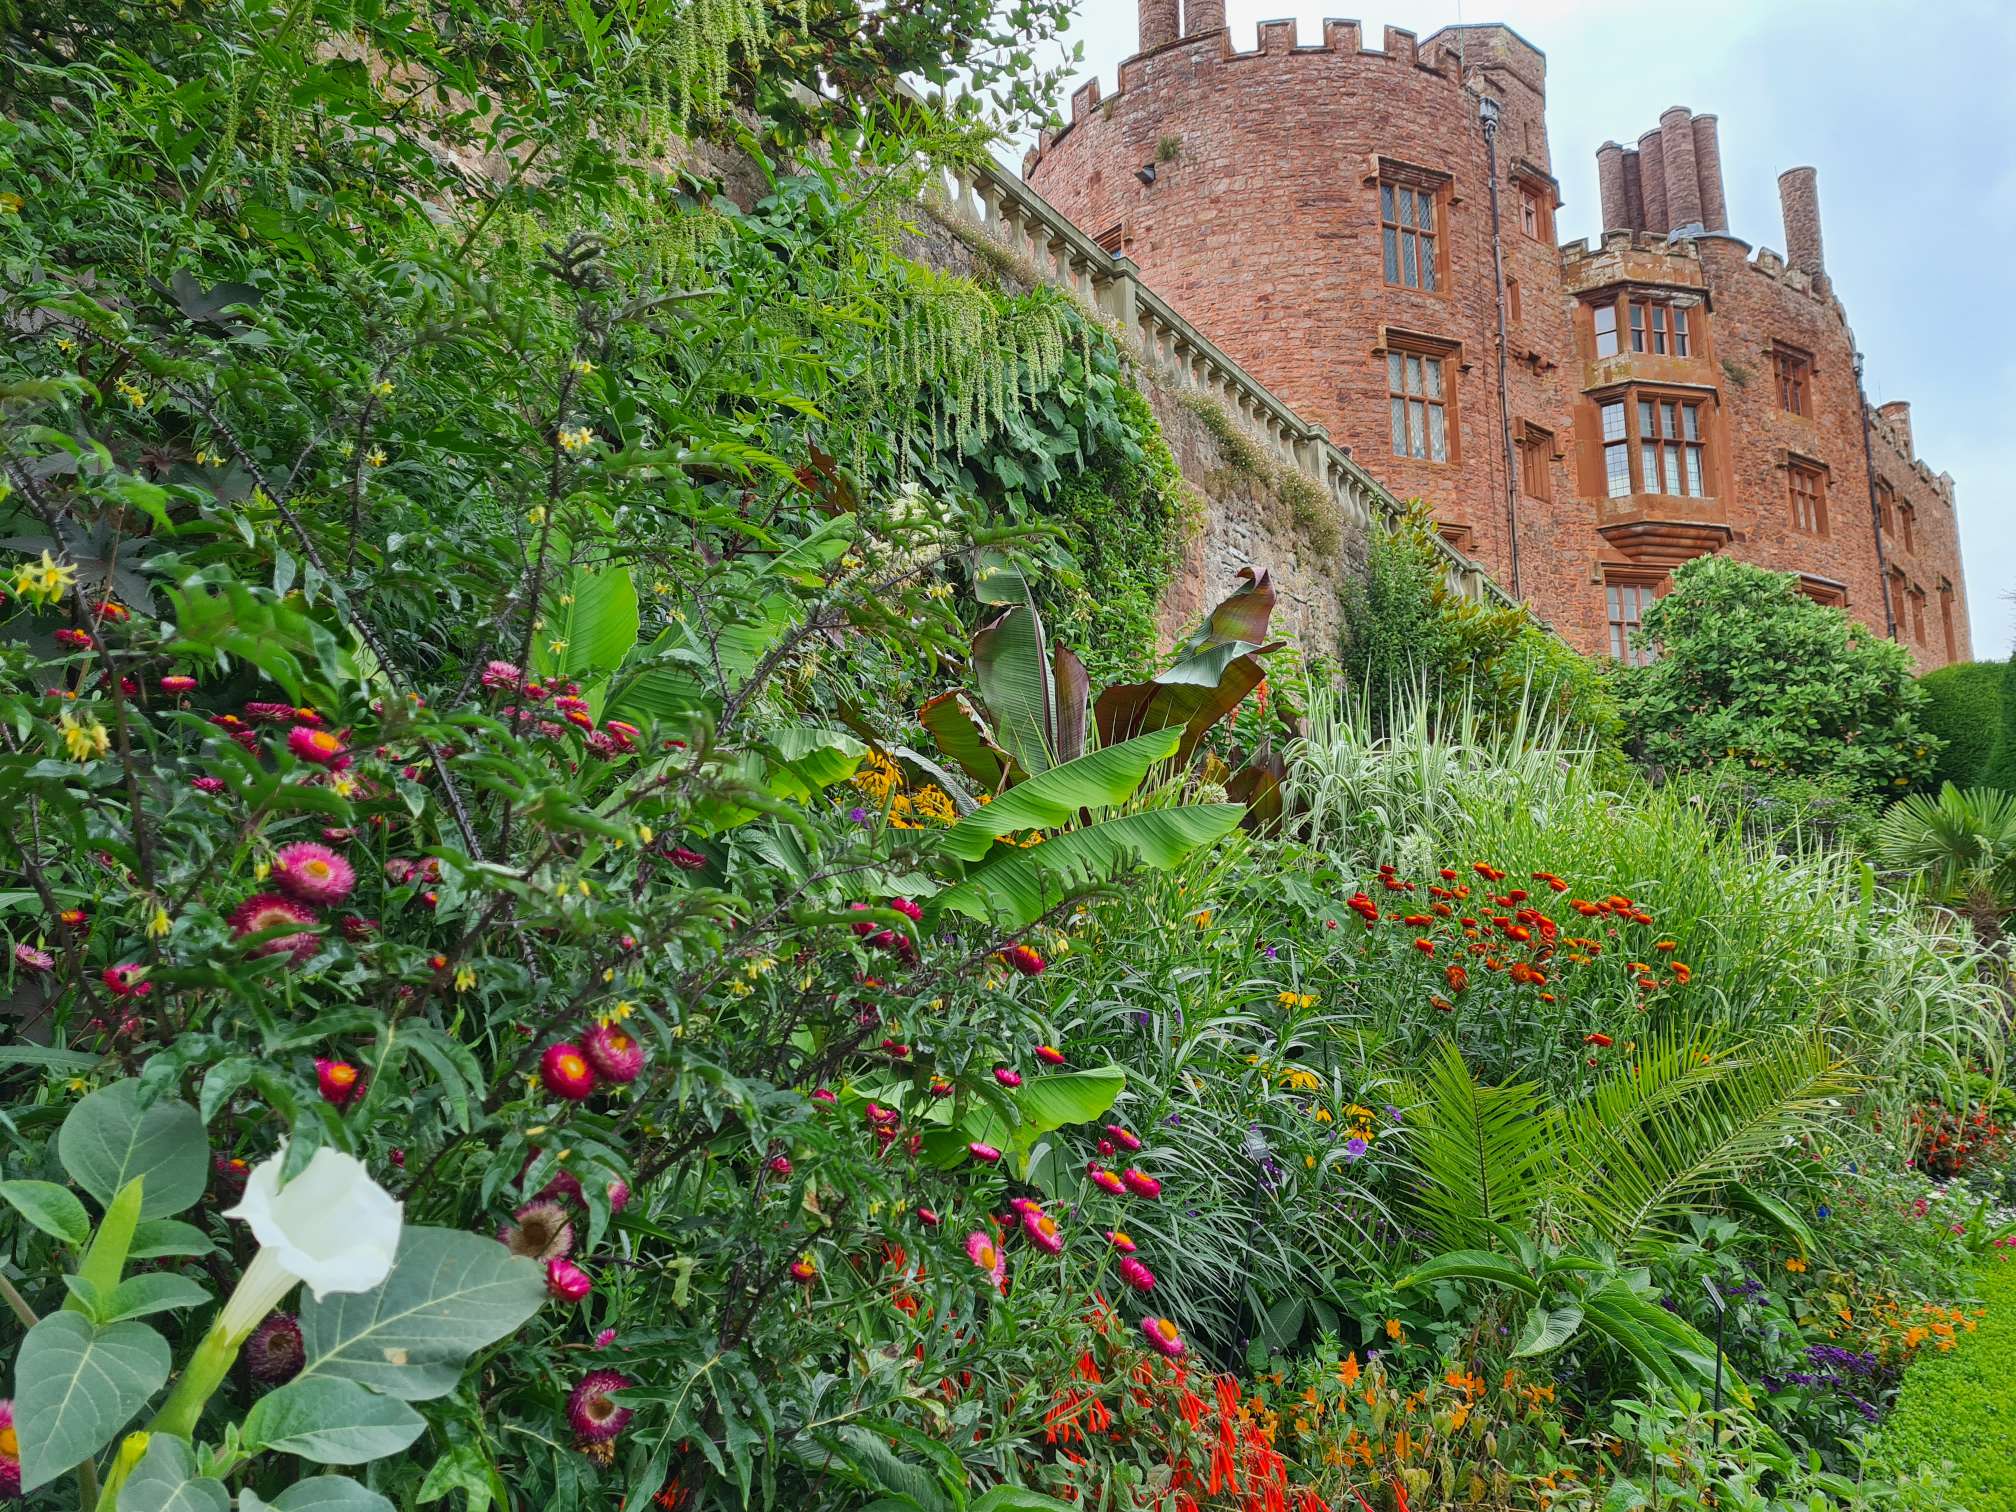 Flower in the garden of Powis castle with the castle showing in the rear of the picture